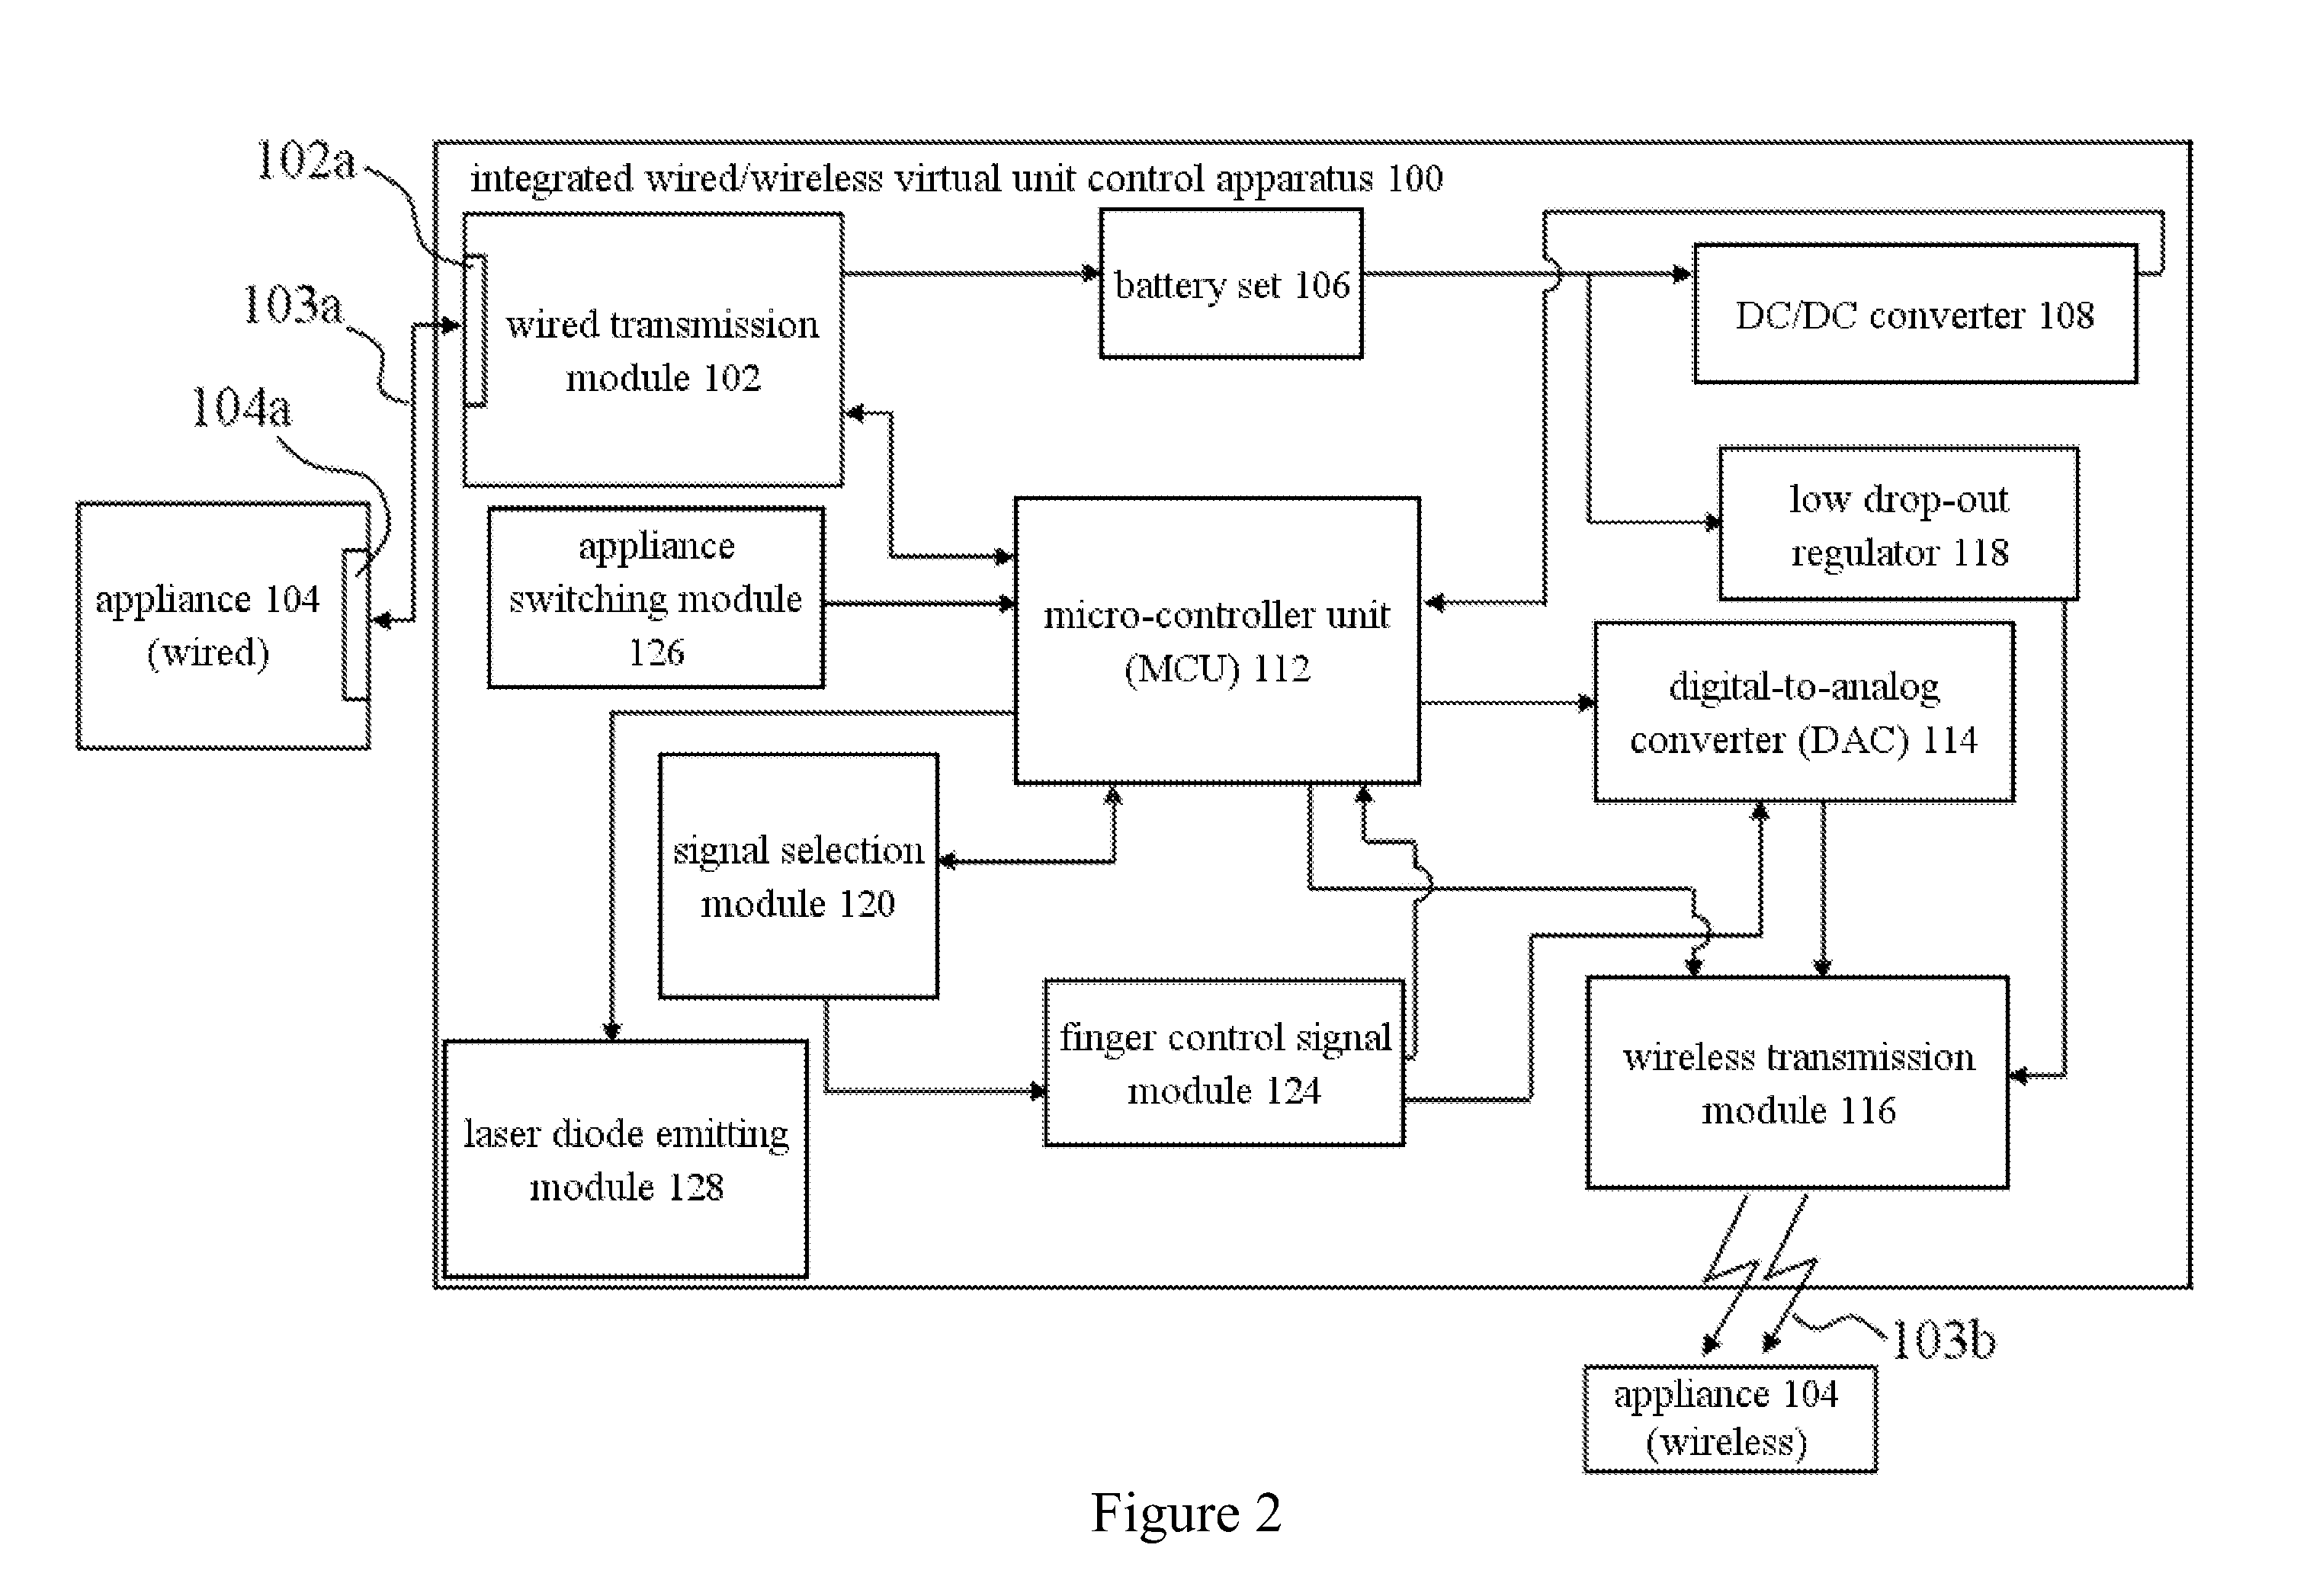 Integrated Wired/Wireless Virtual Unit Control Apparatus